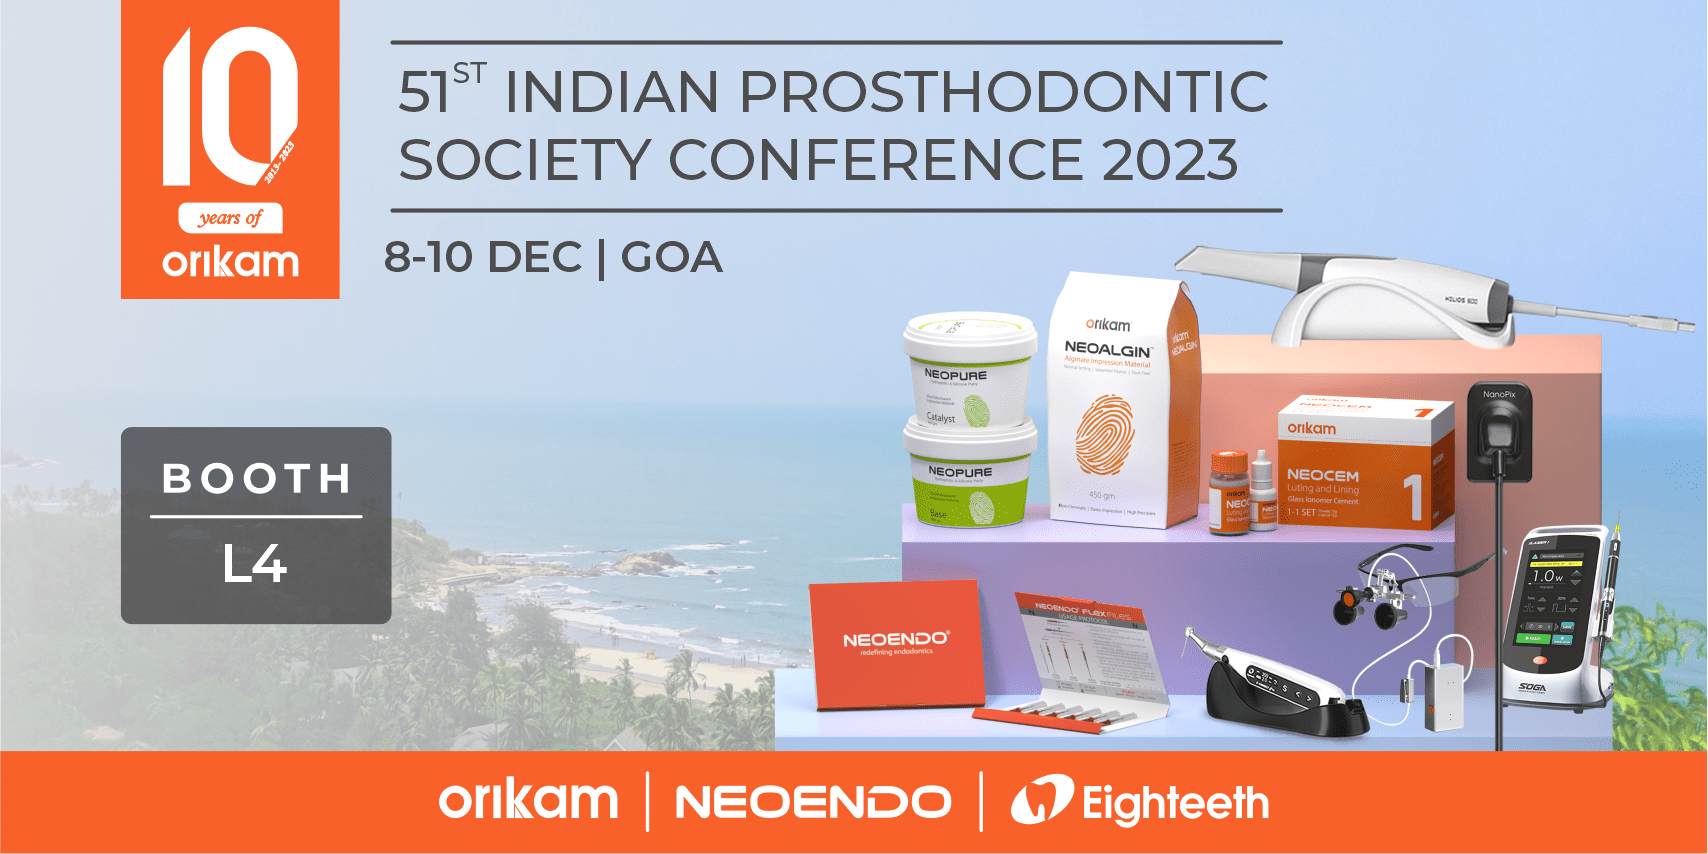 "51st Indian Prosthodontic Society Conference 2023"